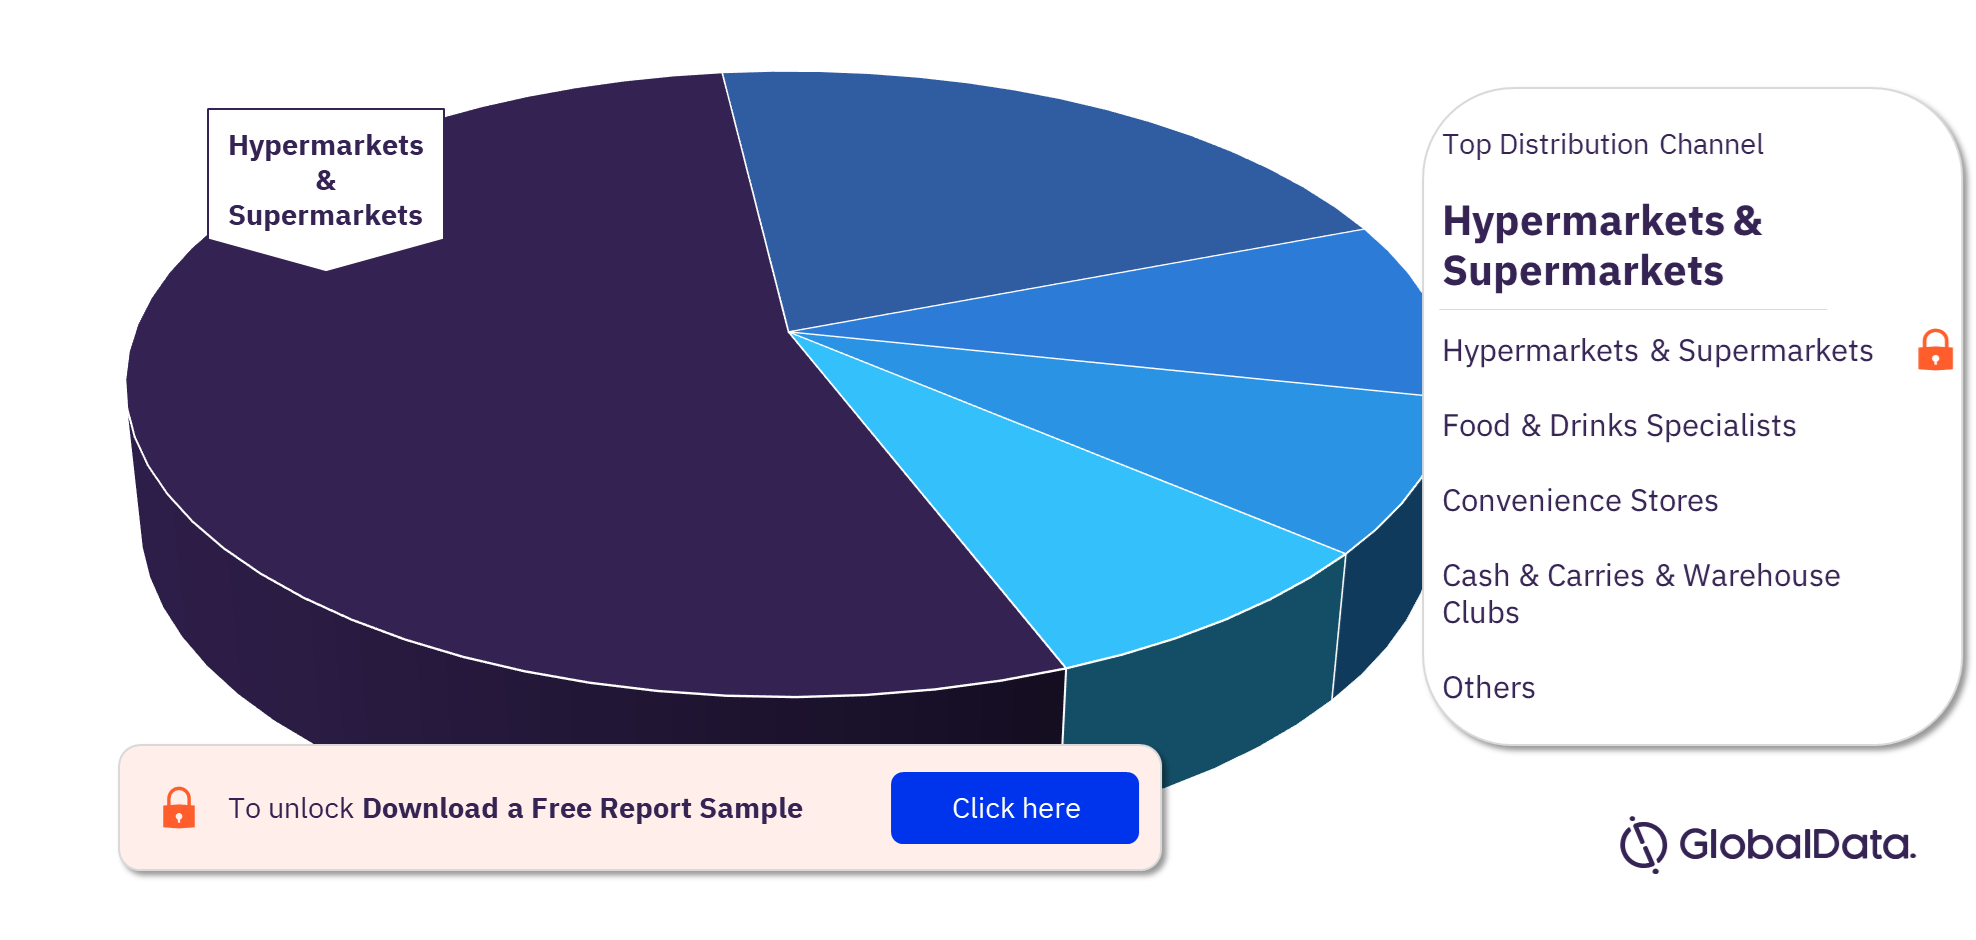 Israel Frozen Fish and Seafood Market Analysis, by Distribution Channels, 2021 (%)